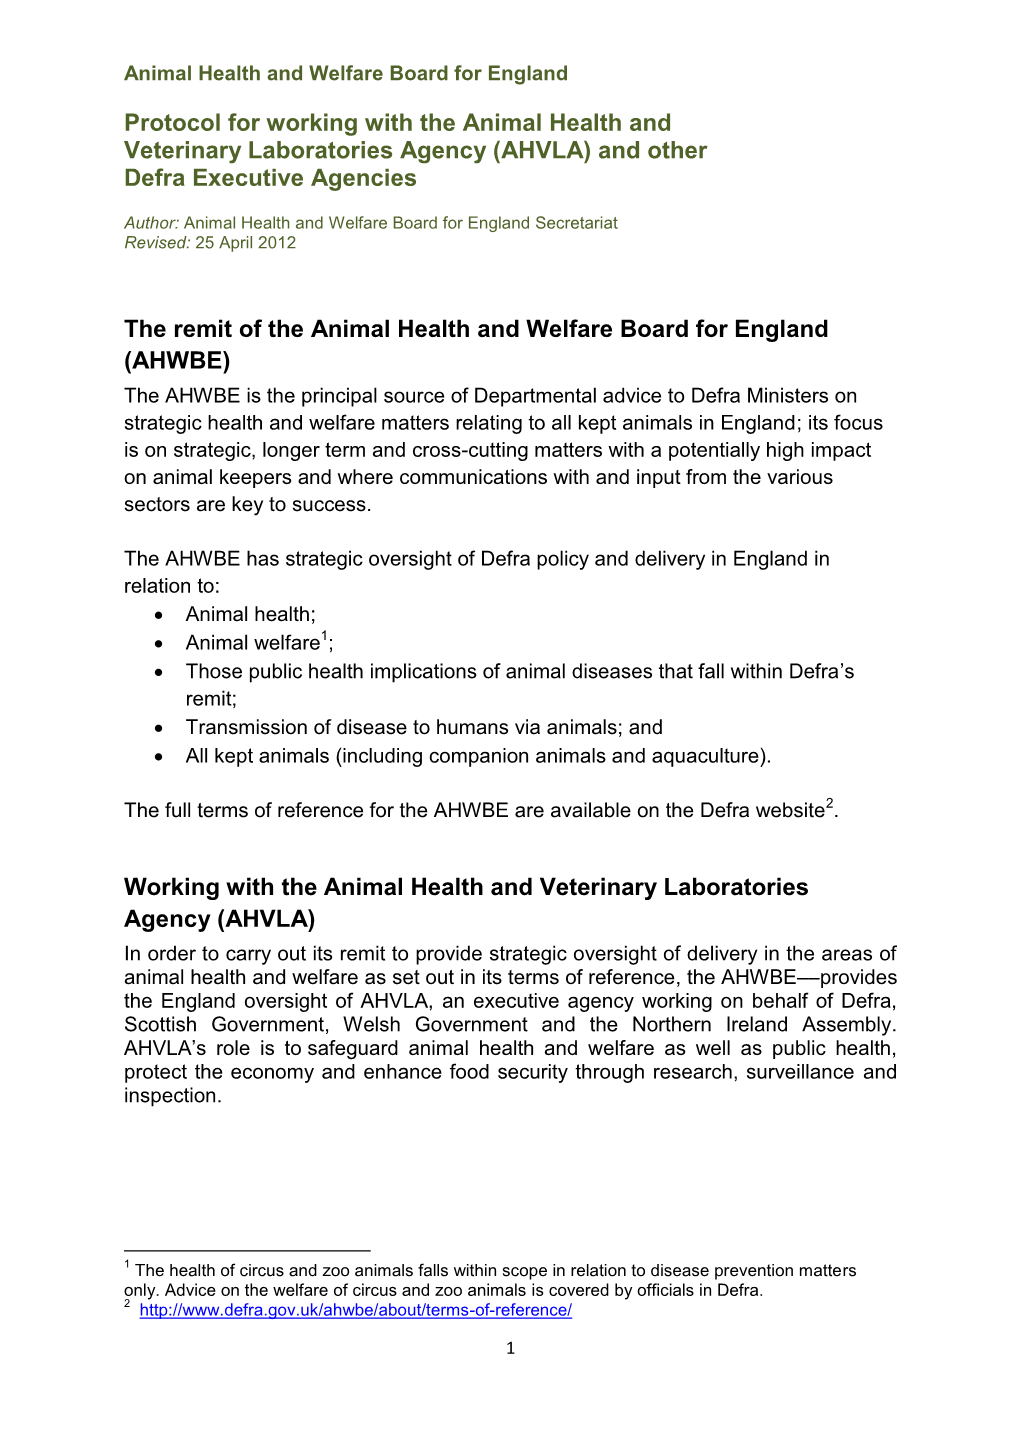 (AHVLA) and Other Defra Executive Agencies